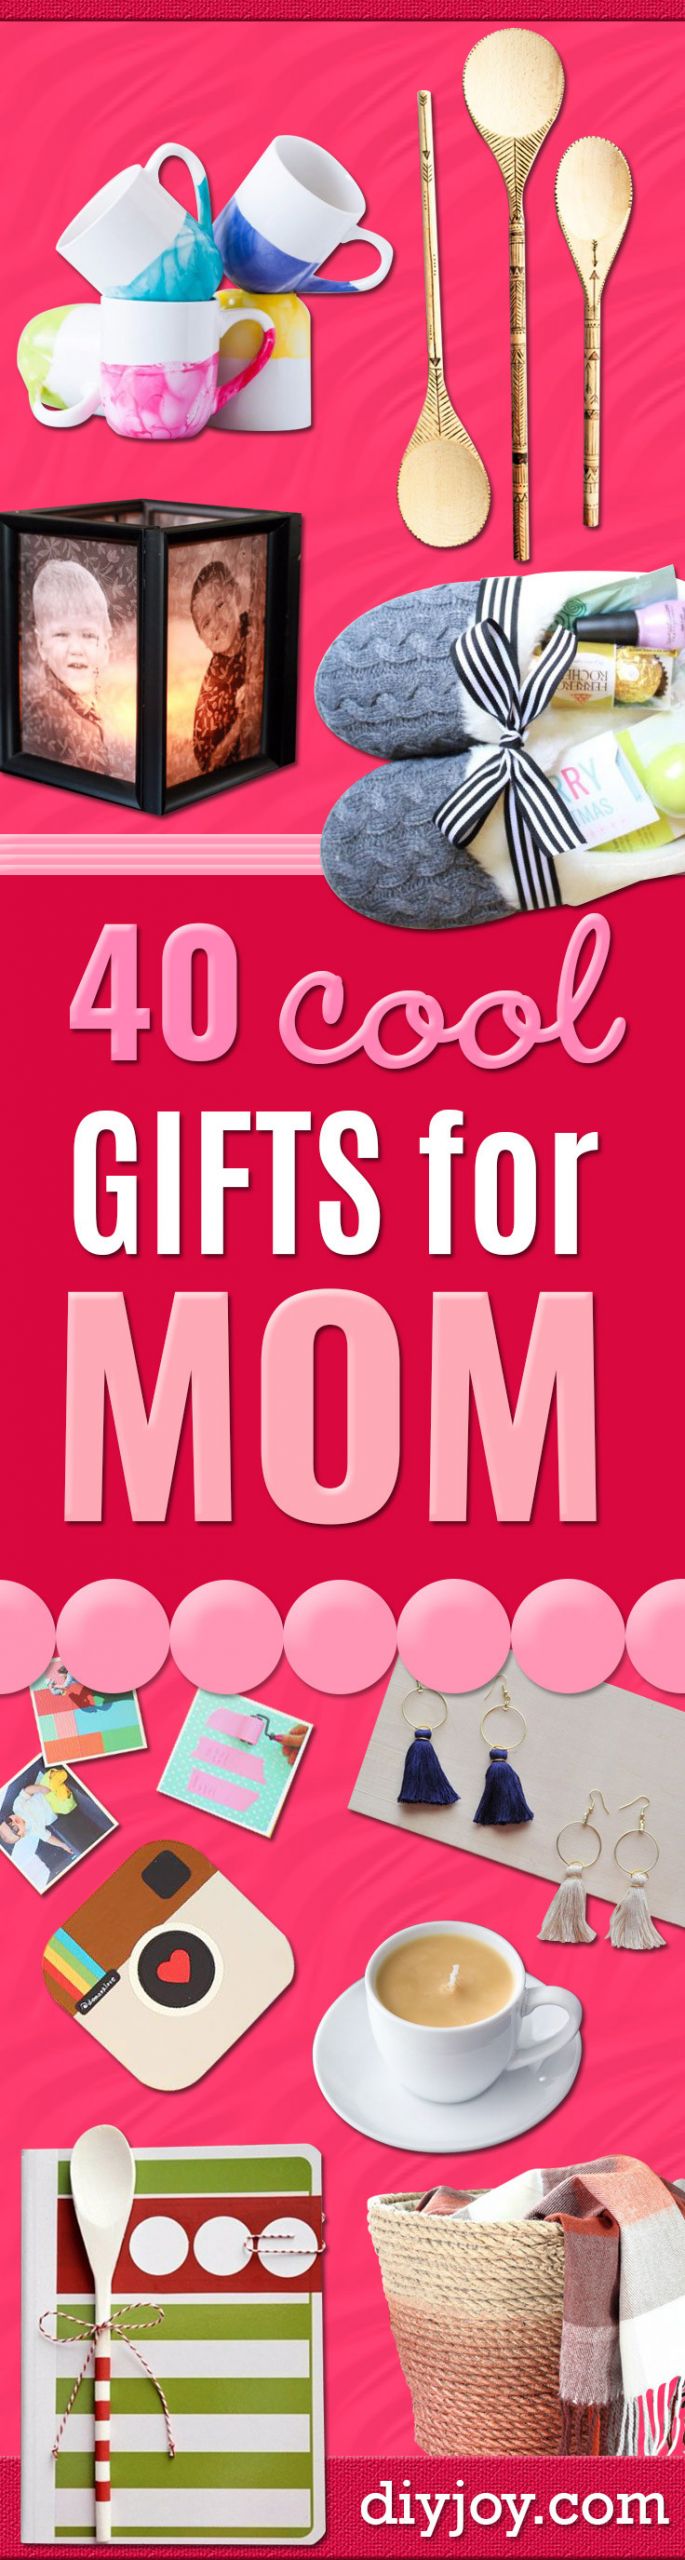 Gift Ideas For Stepmother
 40 Coolest Gifts To Make for Mom